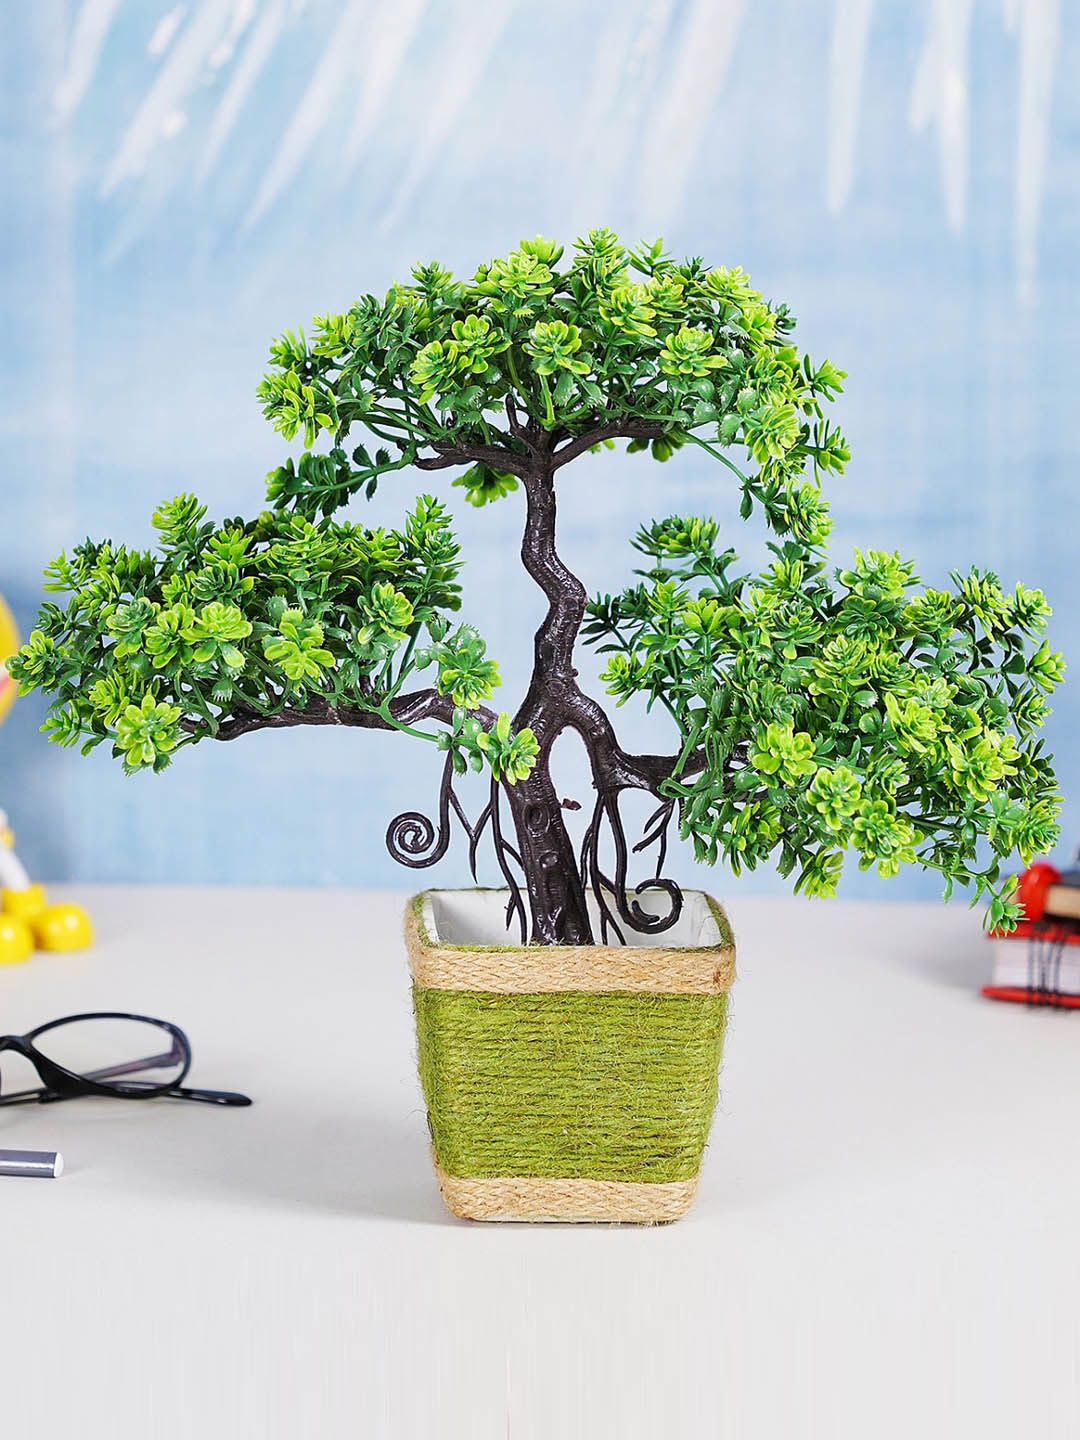 Dekorly Green Artificial Bonsai Plant With Jute Pot Price in India